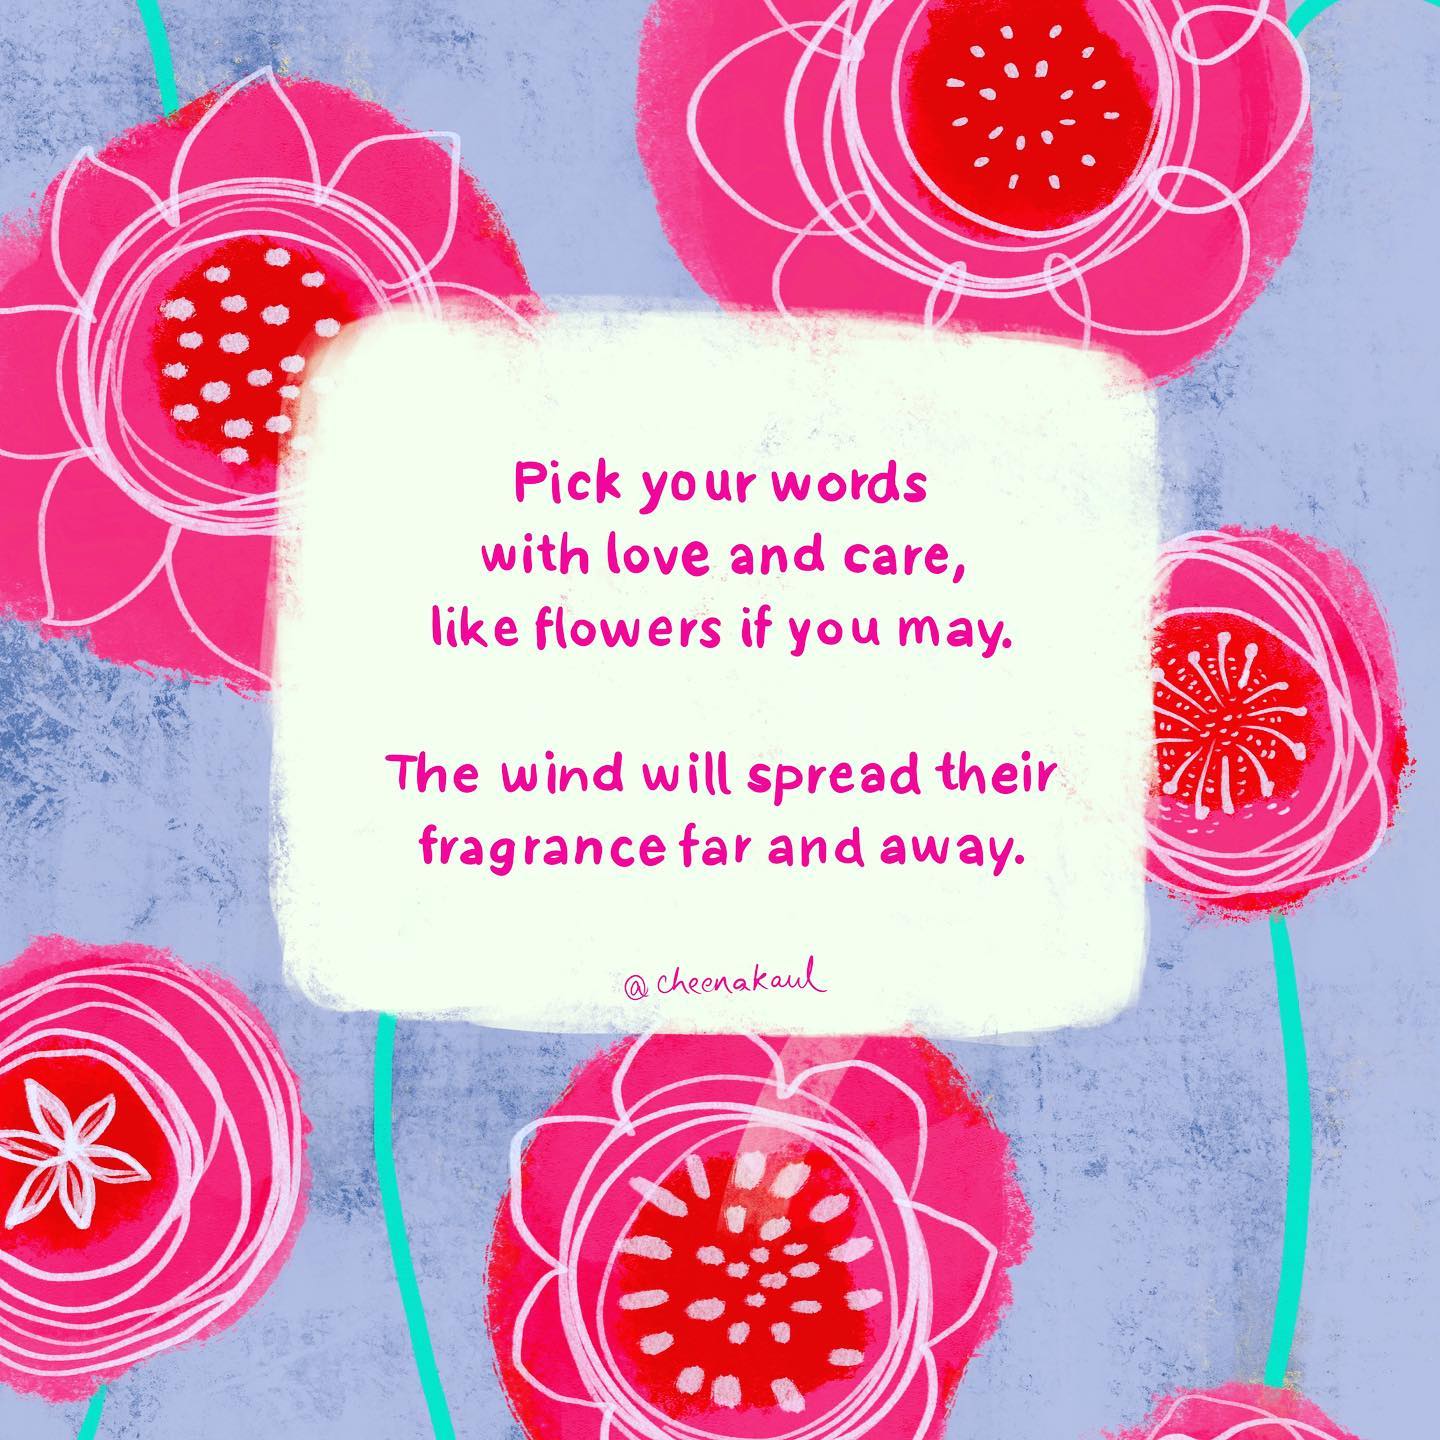 Pick your words with love and care, like flowers if you may. The wind will spread their fragrance far and away.